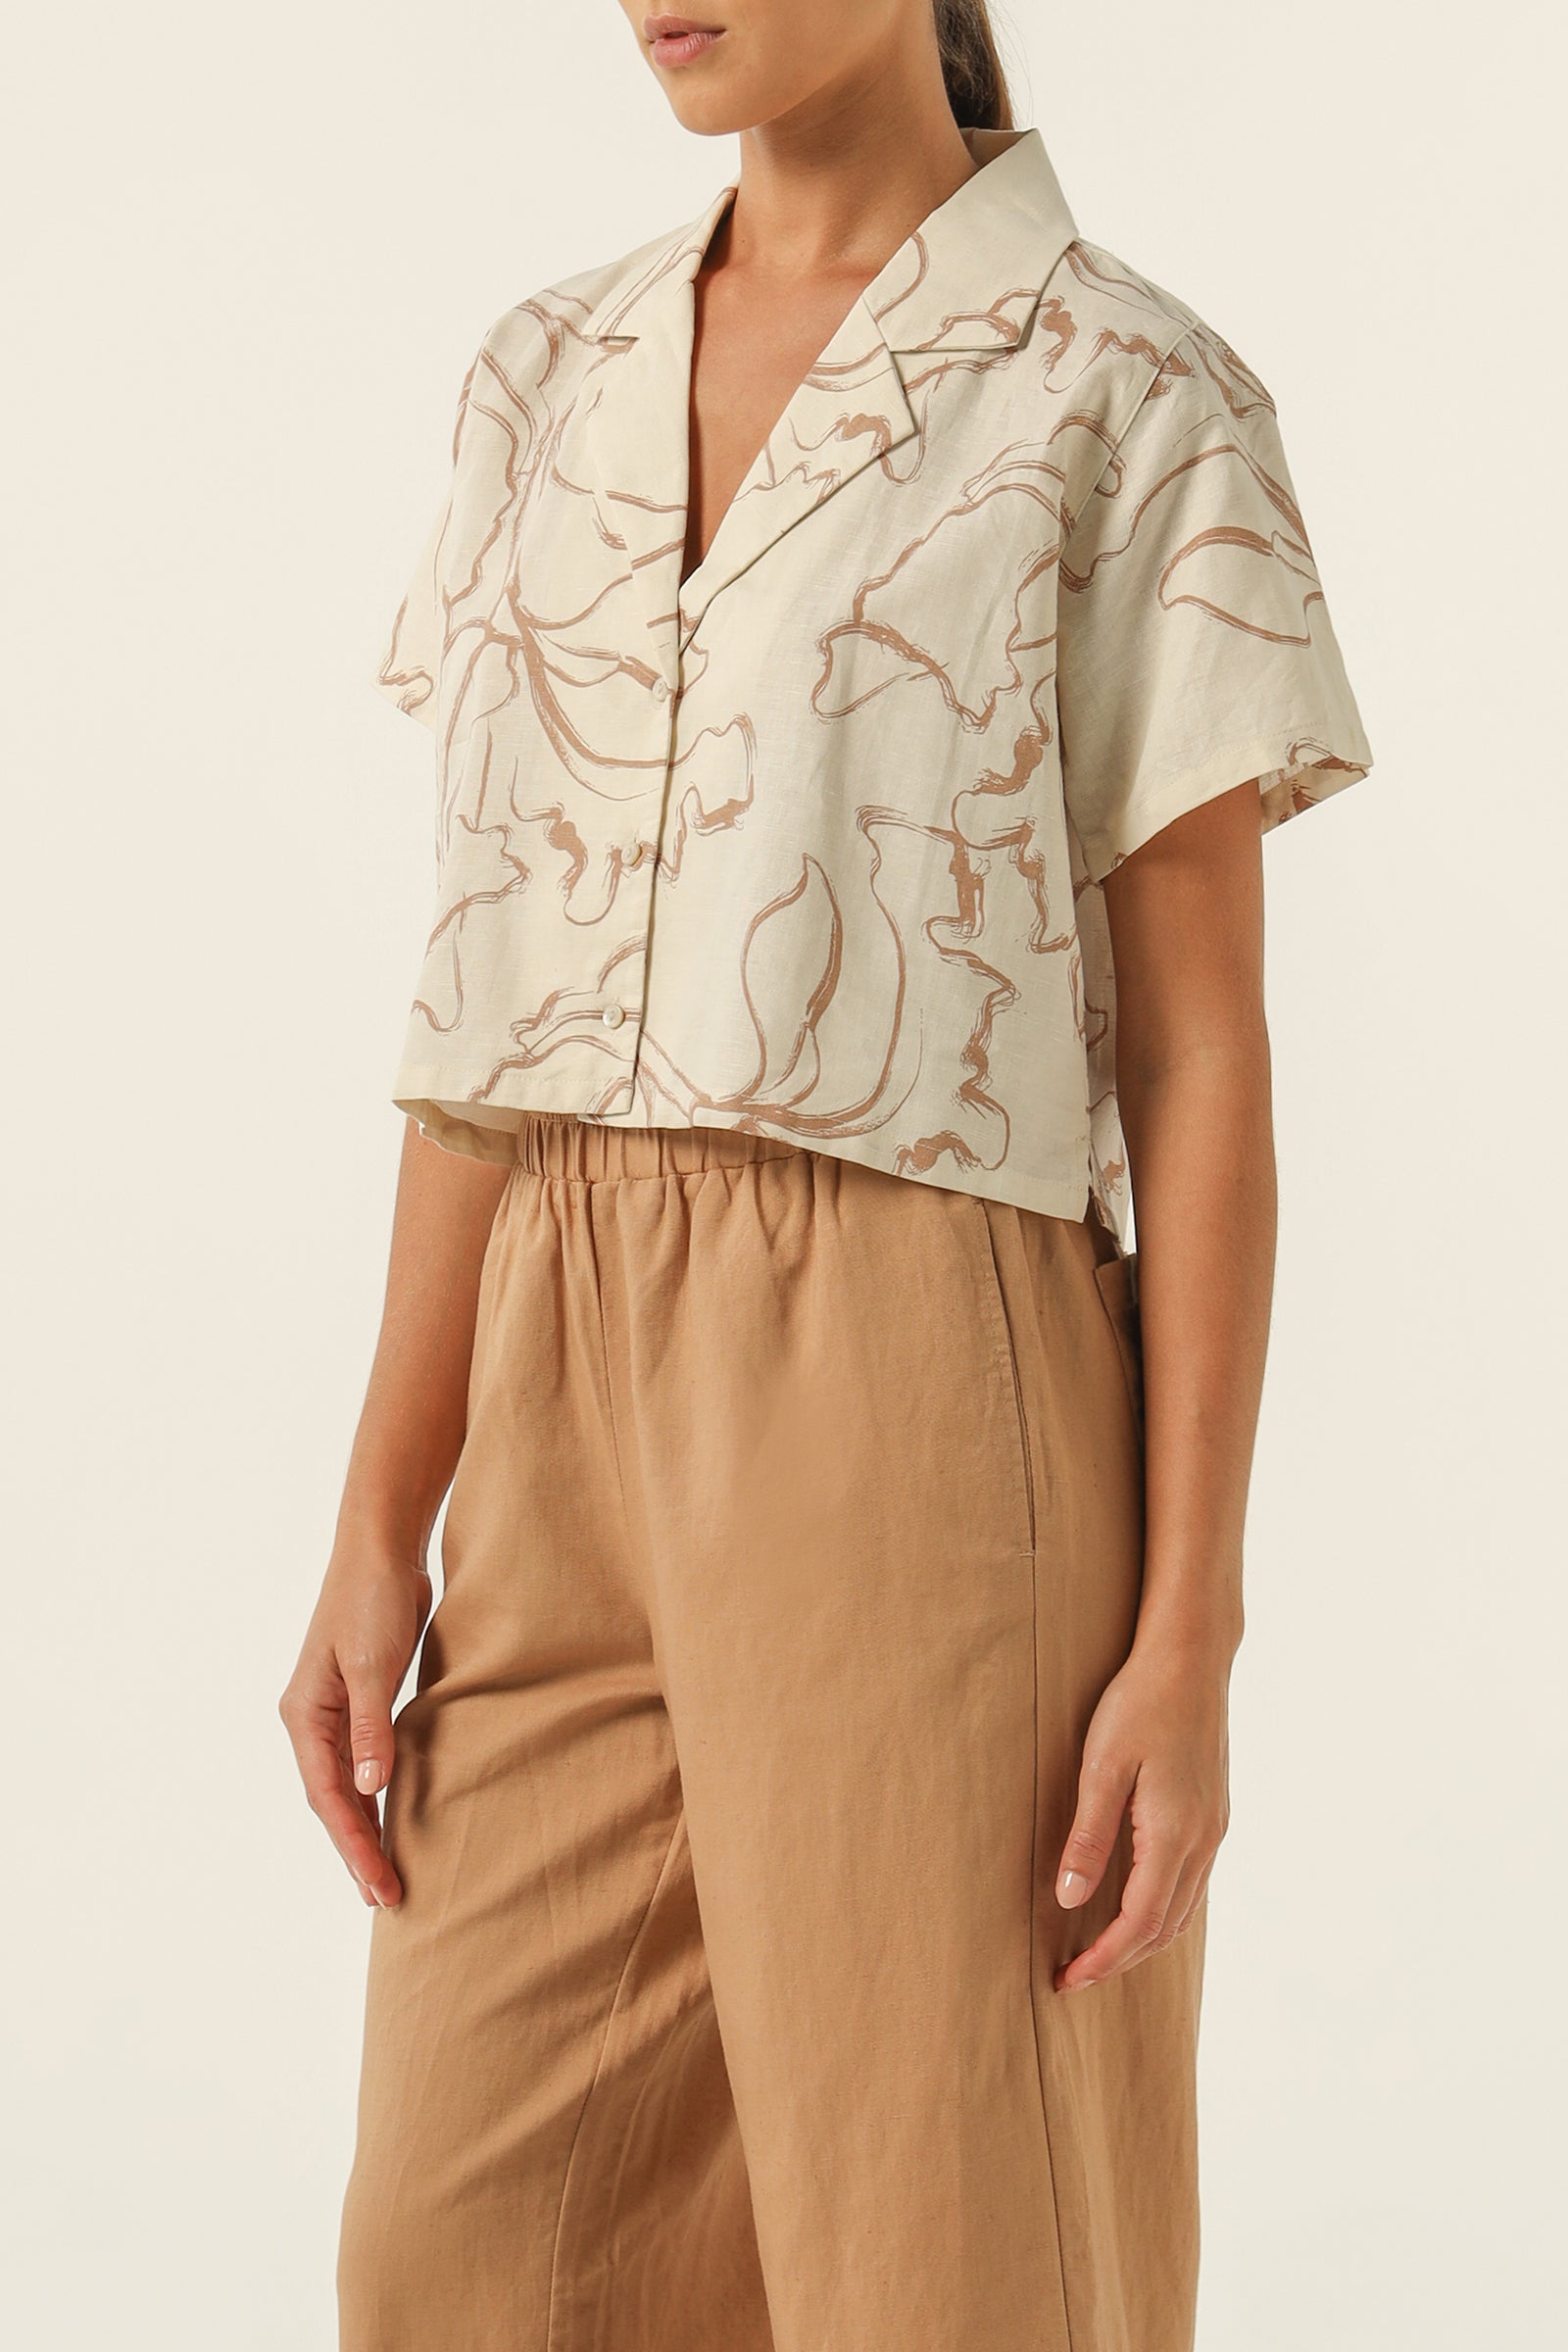 Nude Lucy Zion Shirt Matisse 